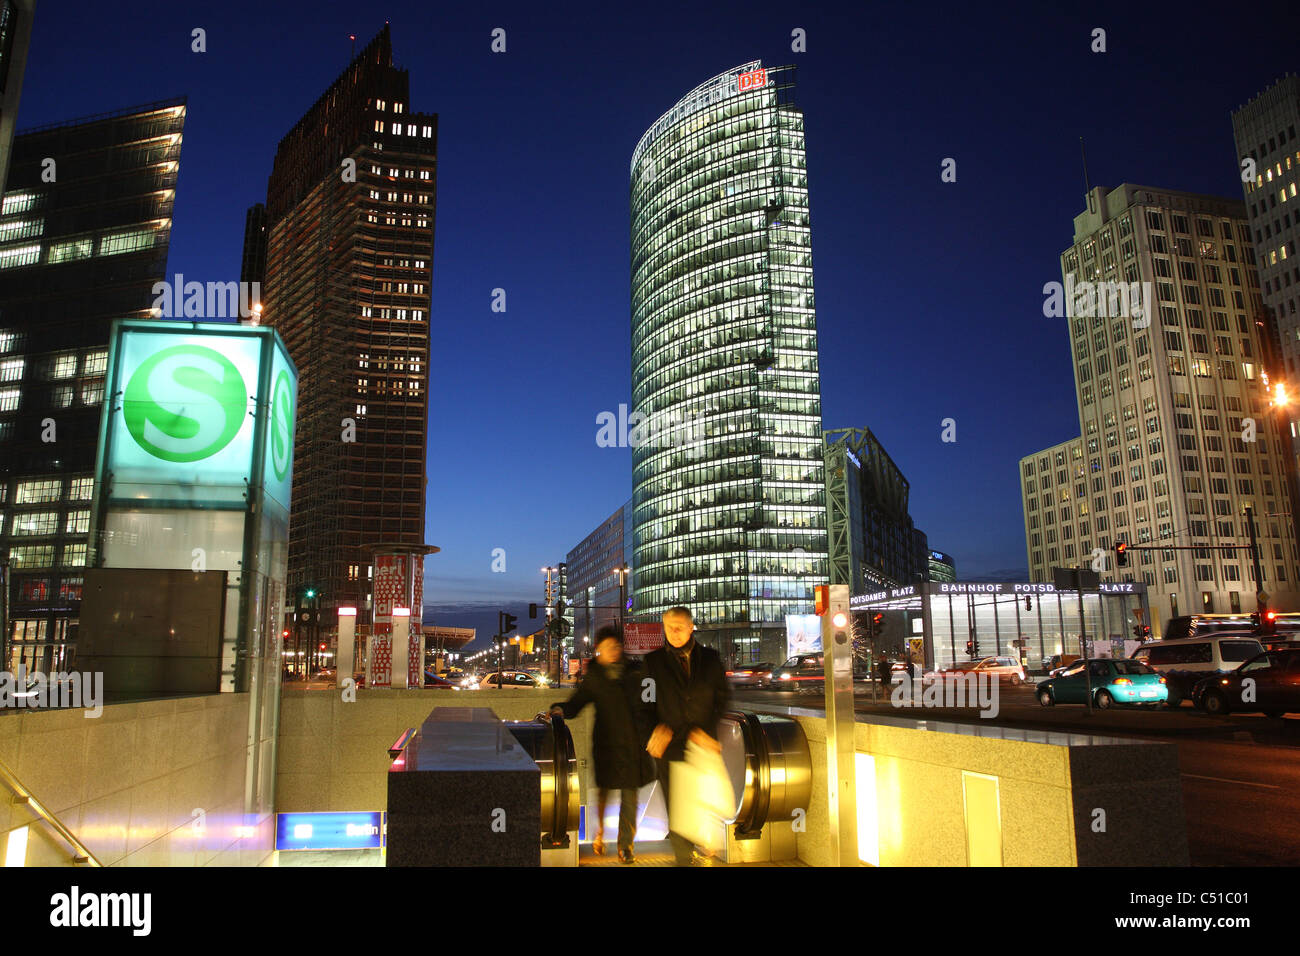 S-Bahn exit at the Potsdamer Platz in the evening, Berlin, Germany Stock Photo